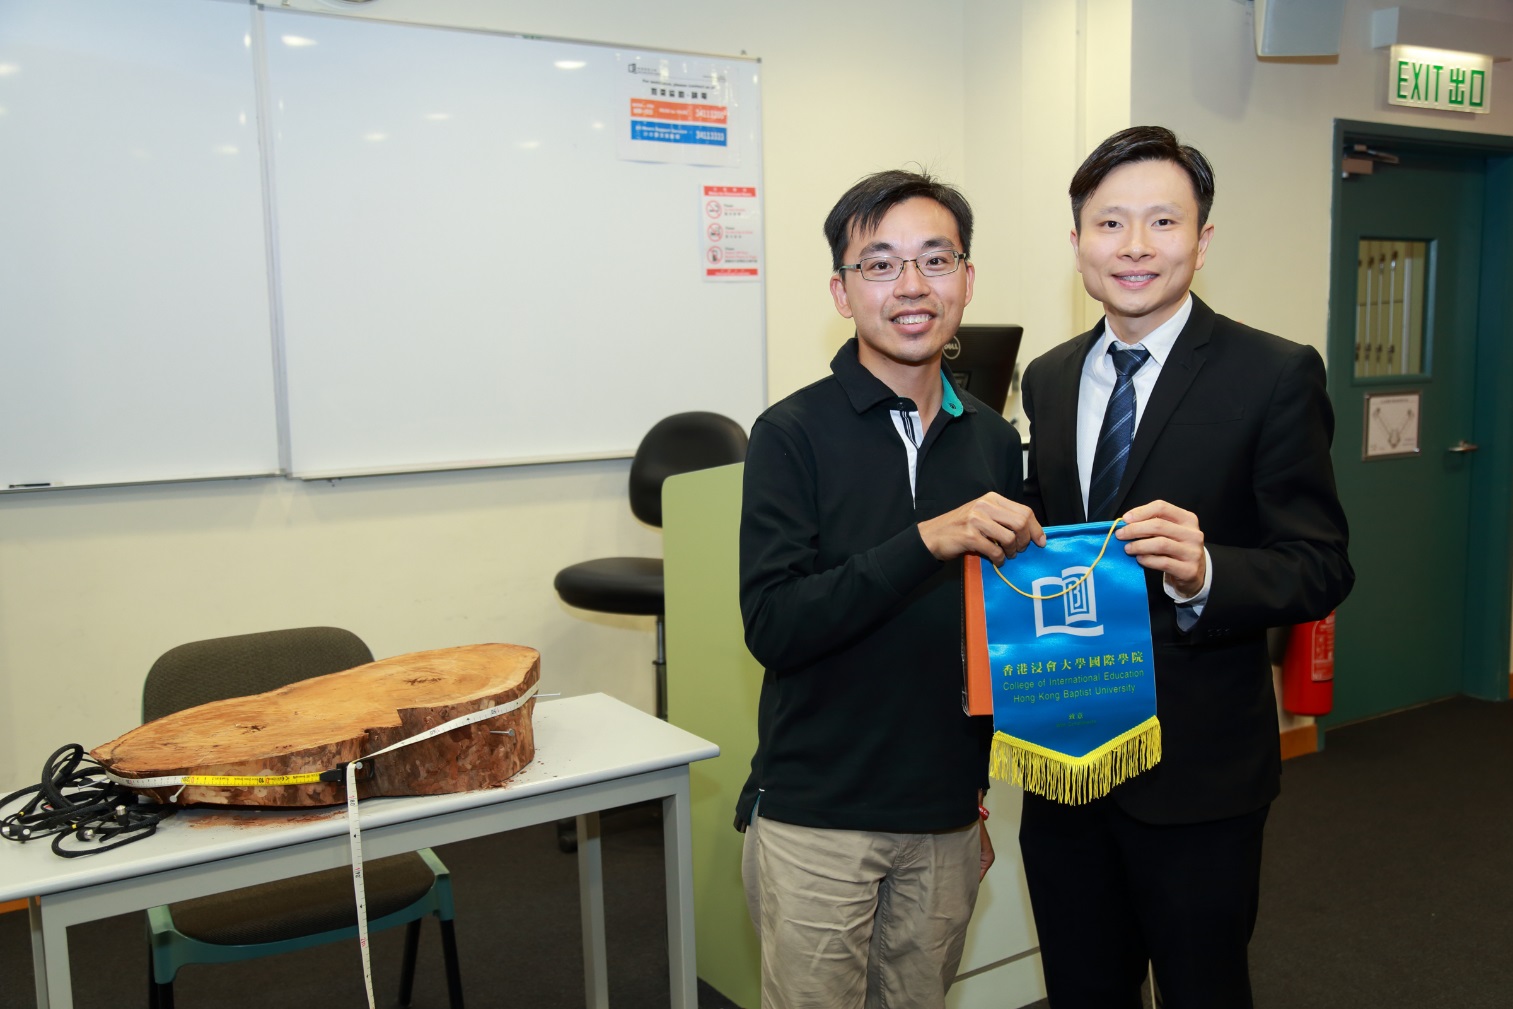 Mr. Chicky Wong, President of International Society of Arboriculture, Hong Kong Chapter (left) and Dr. Sam Lau, Director of CIE (right) commemorating the seminar.